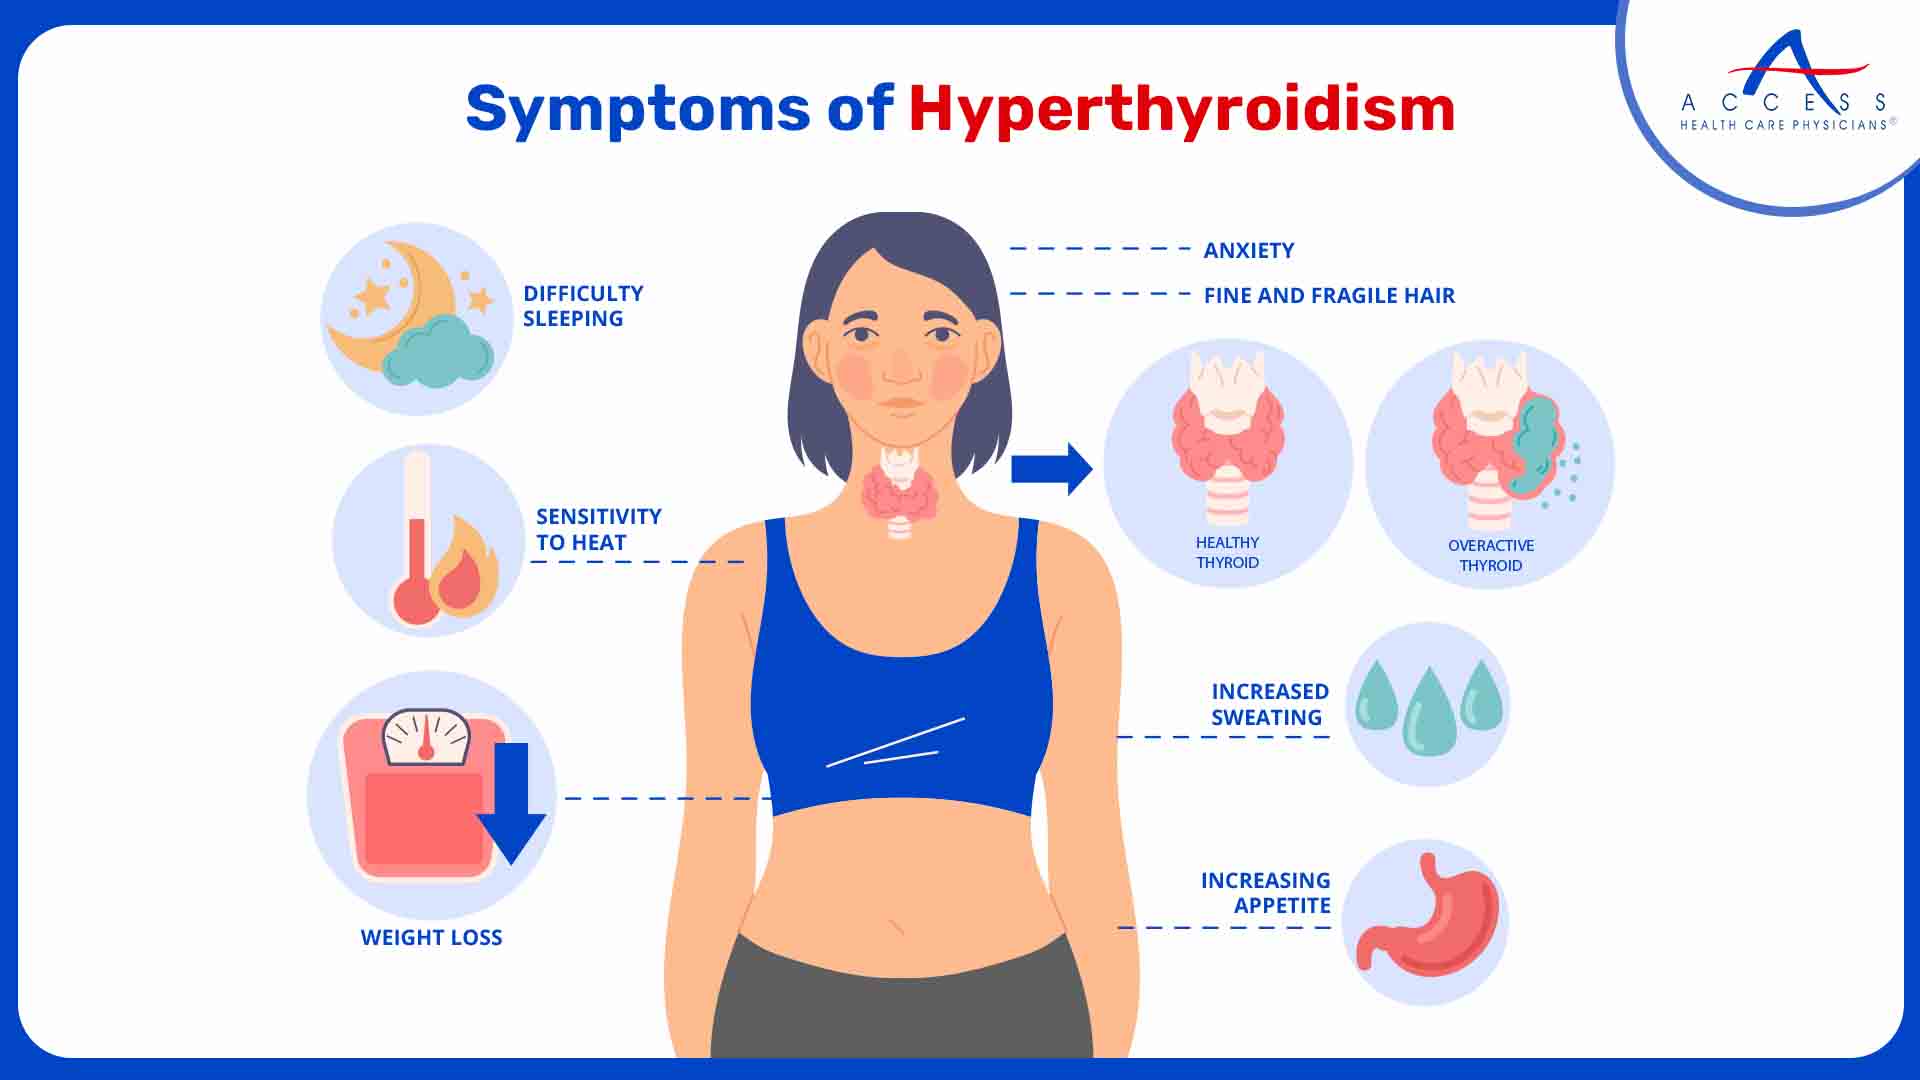 The symptoms of hyperthyroidism can vary in severity but often include